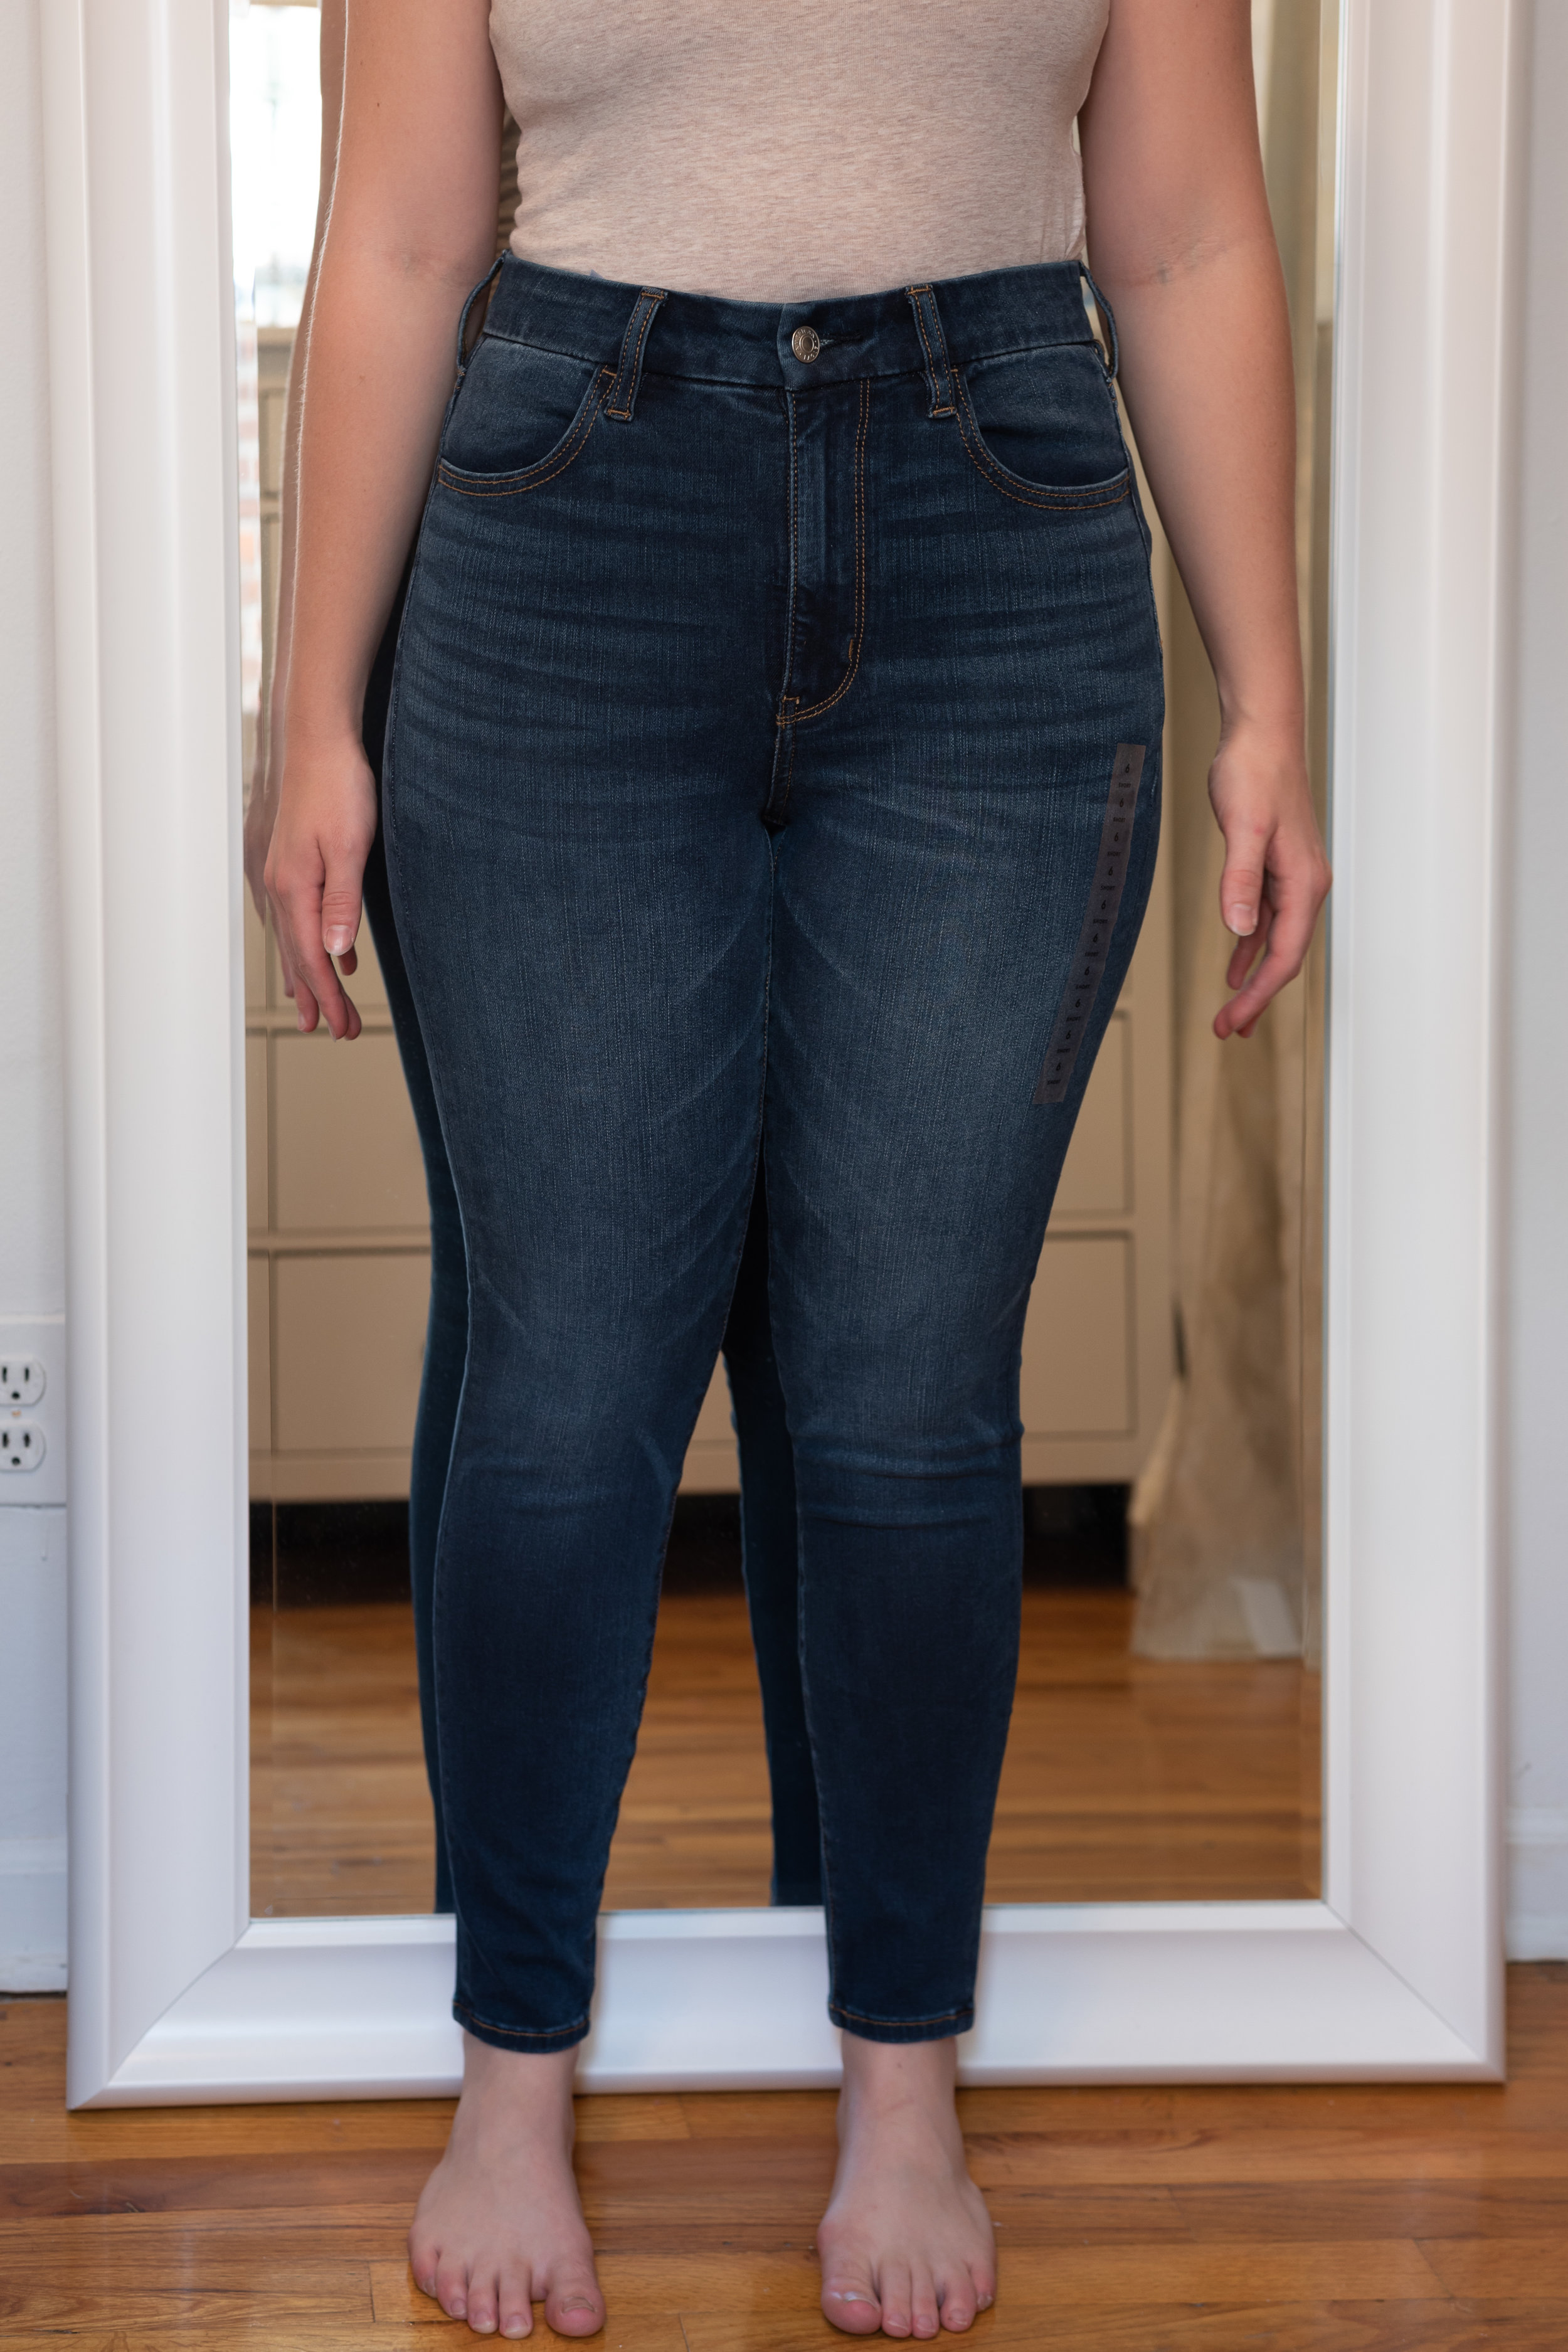 hollister jean review